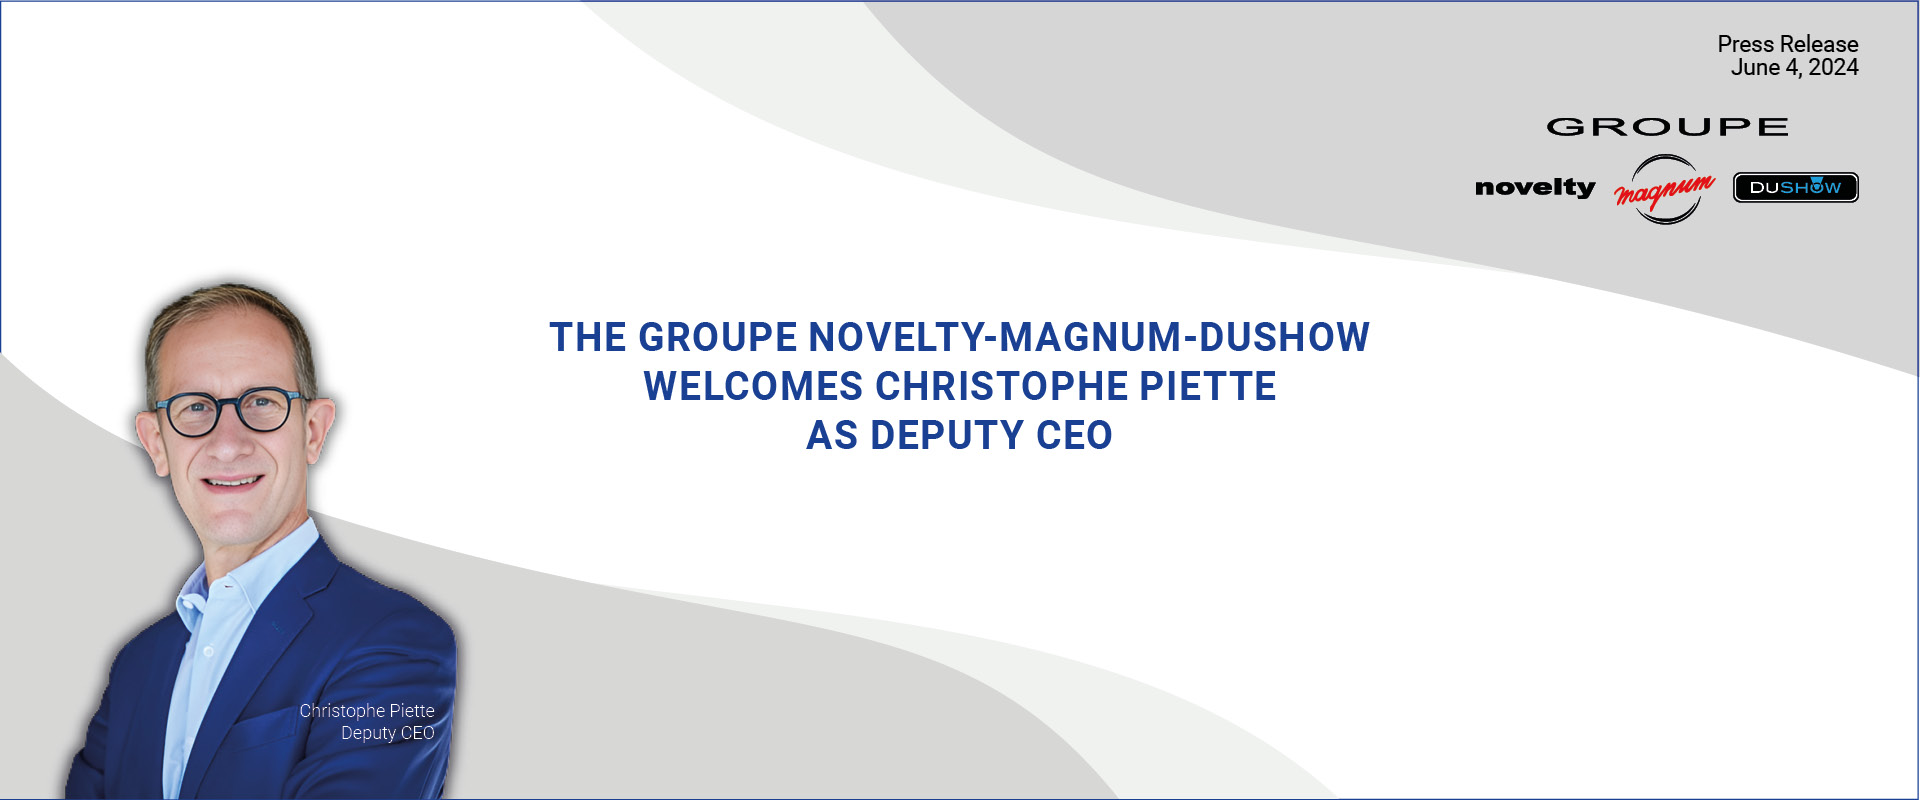 Visuel The Groupe NOVELTY-MAGNUM-DUSHOW welcomes Christophe Piette as Deputy CEO